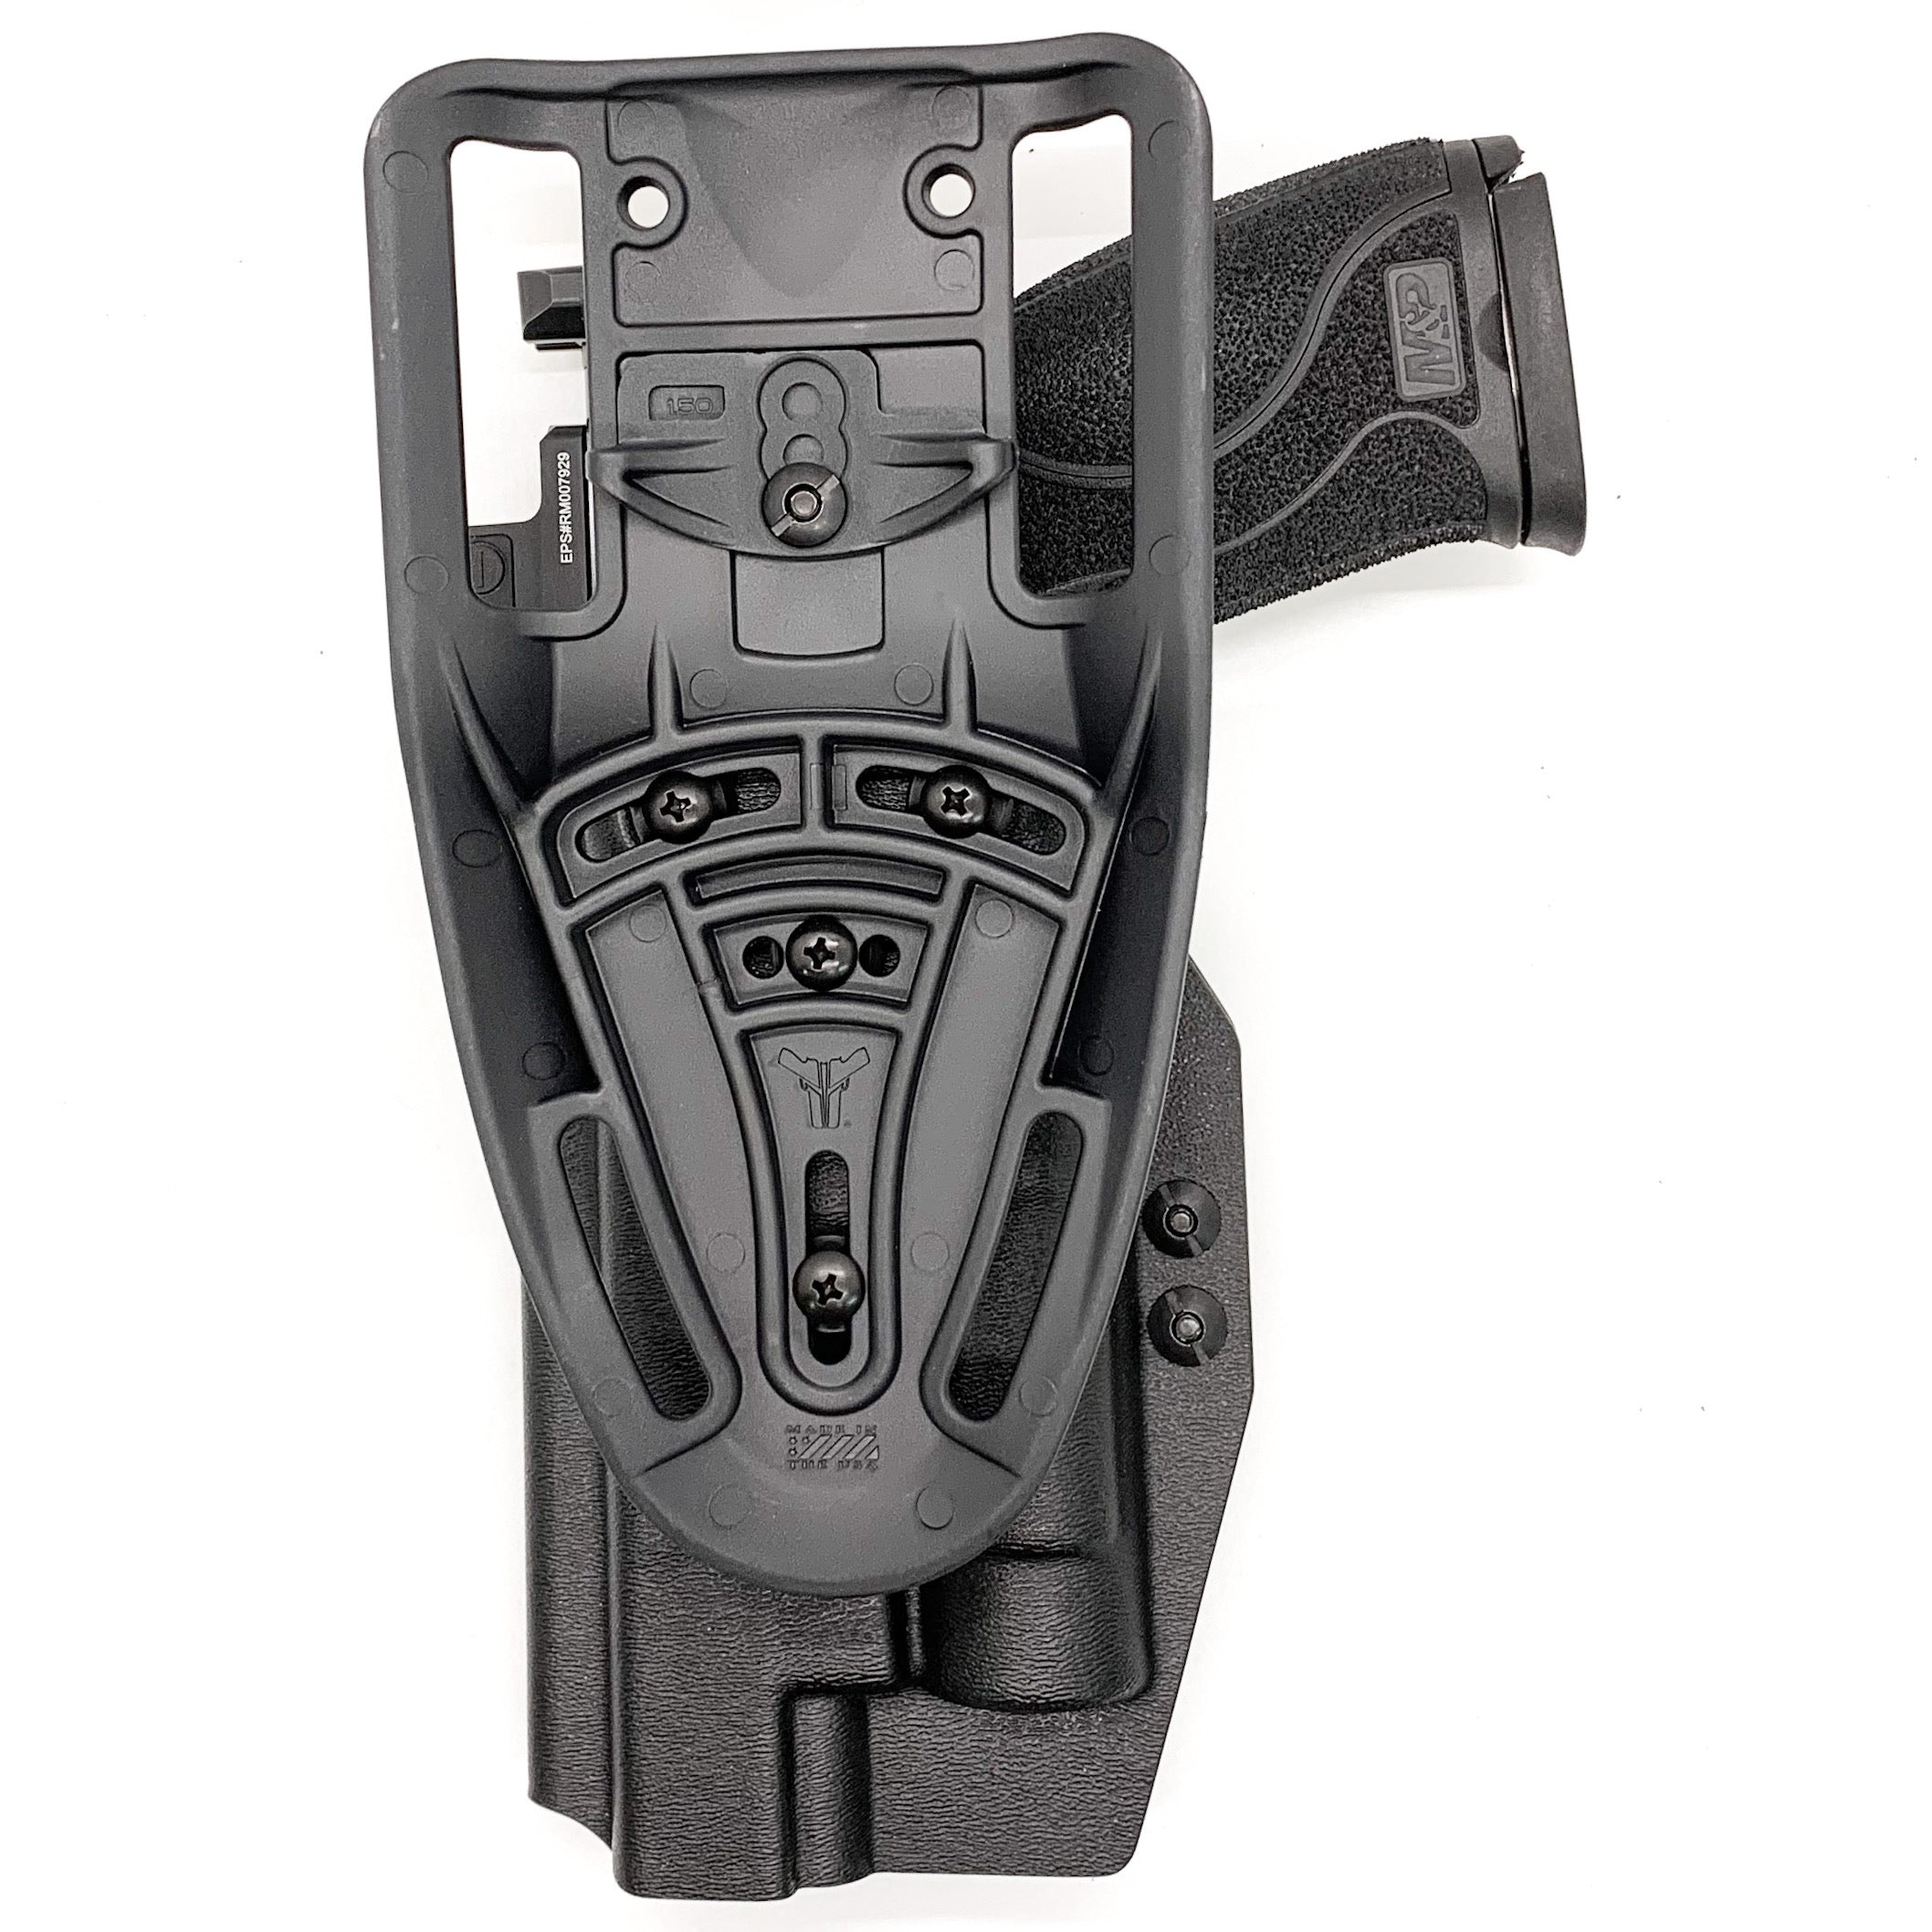 For the best Outside Waistband Duty & Competition OWB Kydex Holster designed to fit the Smith & Wesson Performance Center M&P M2.0 5.6" 10MM pistol with thumb safety and Streamlight TLR-1 HL weapon light shop Four Brothers Holsters.  Full sweat guard, adjustable retention, profiled for a red dot sight. Made in the USA.